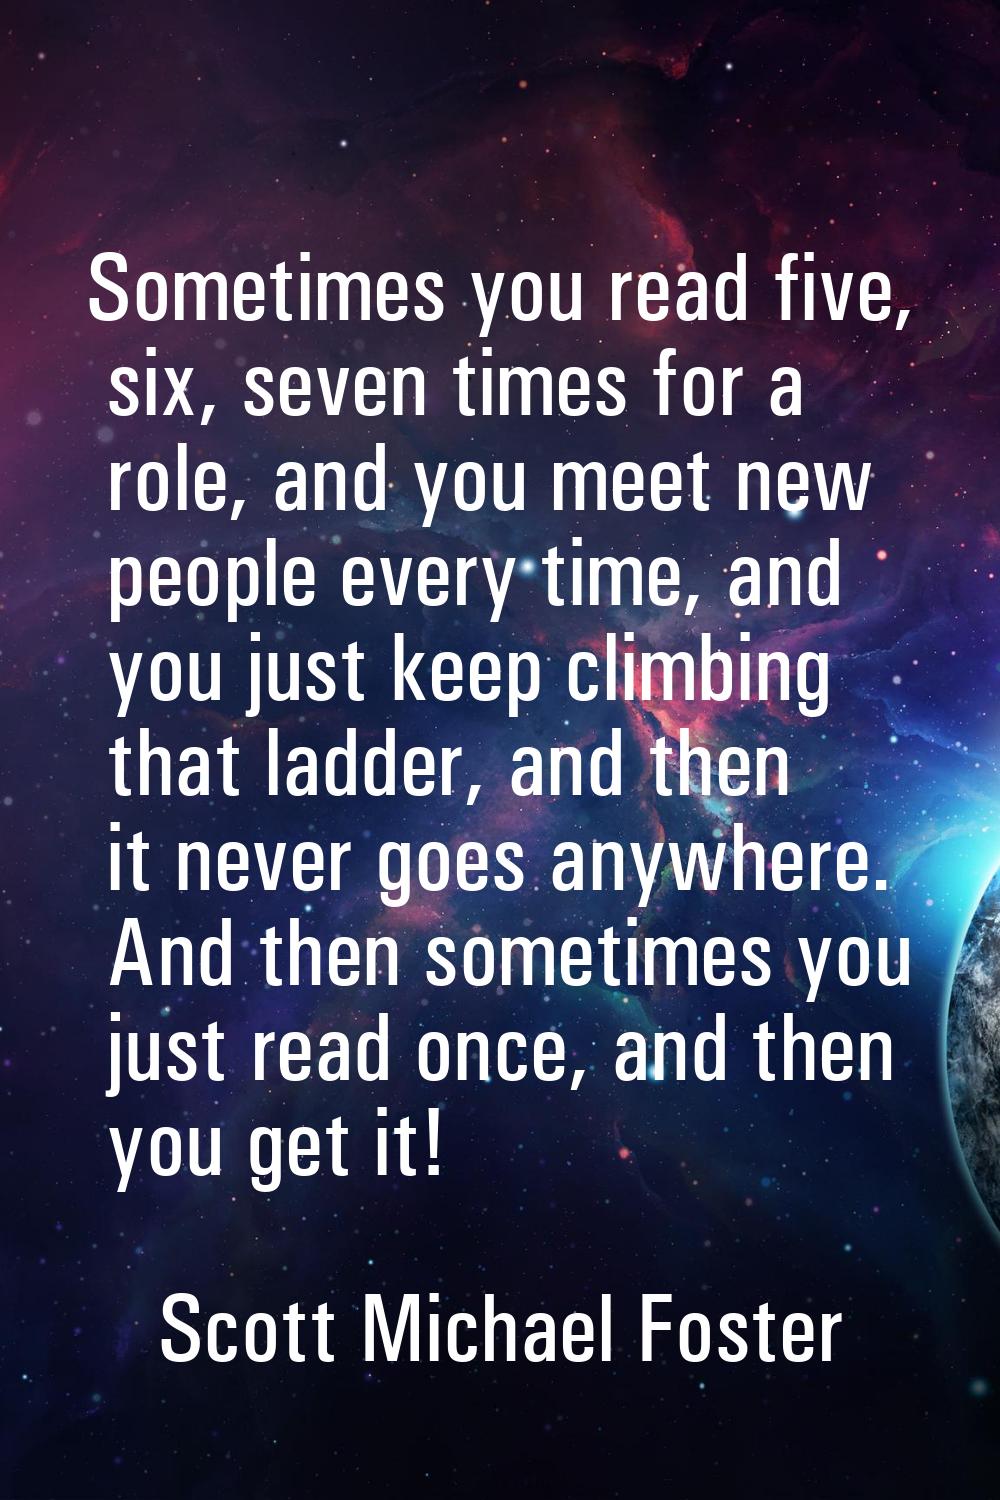 Sometimes you read five, six, seven times for a role, and you meet new people every time, and you j